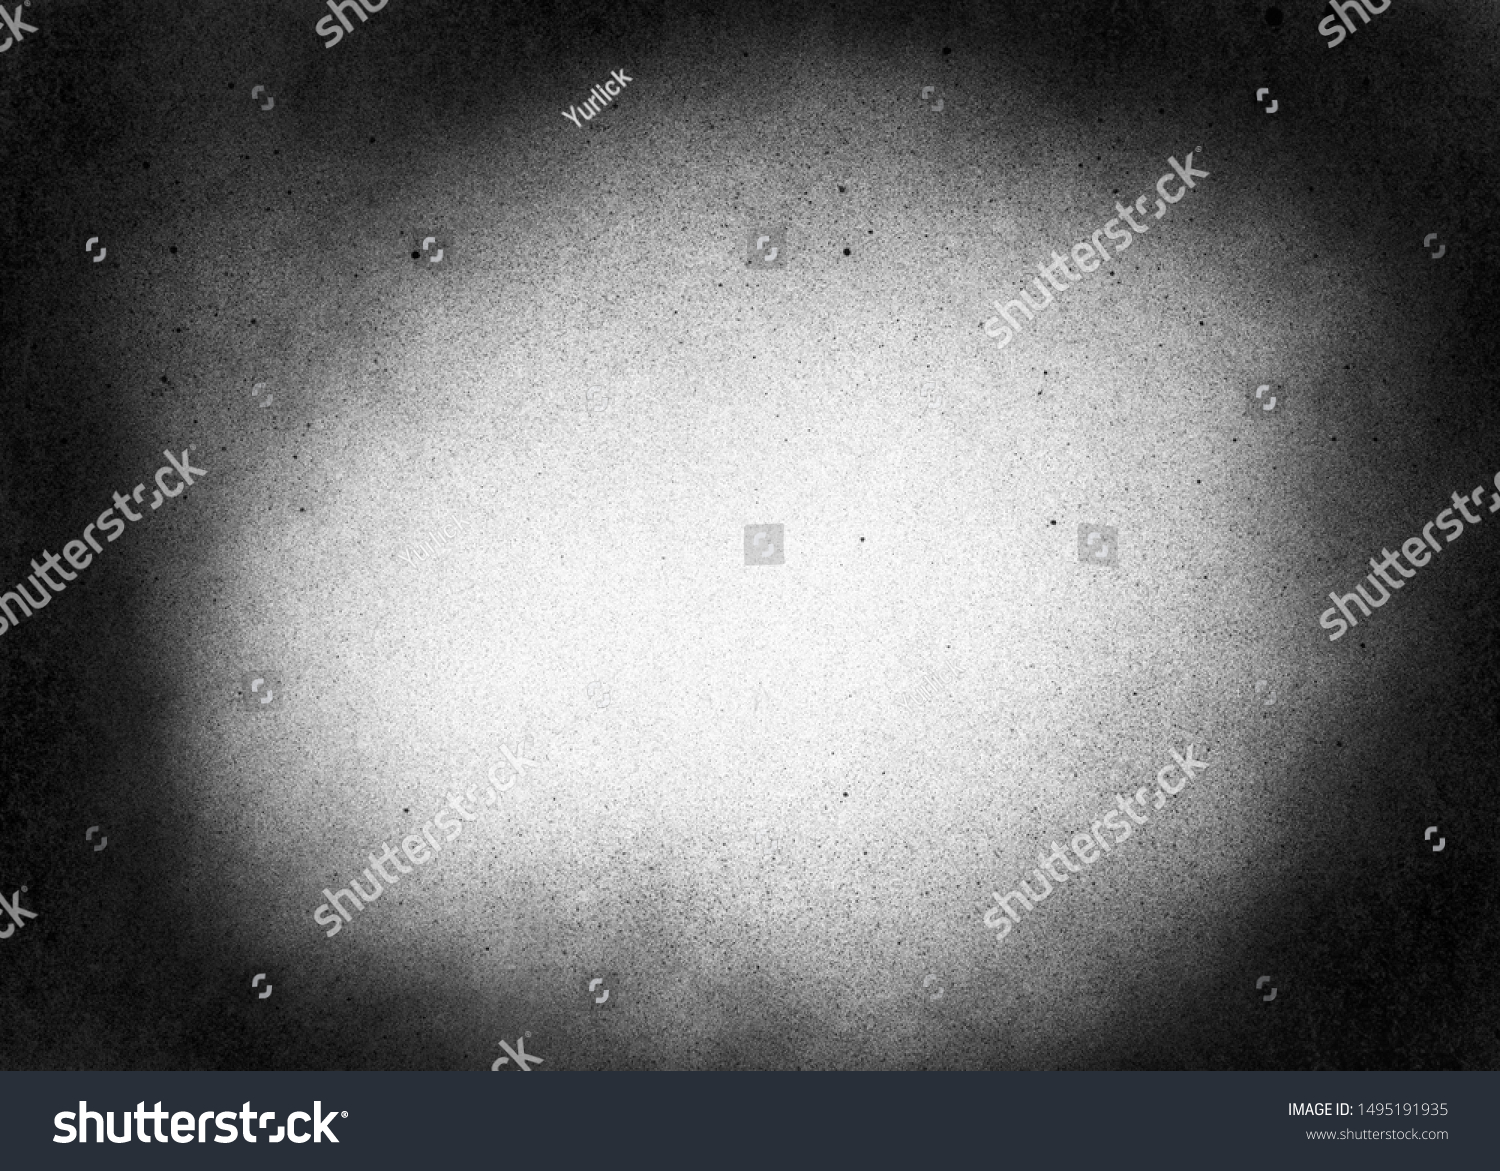 Vintage black and white noise texture. Abstract splattered background for vignette. #1495191935